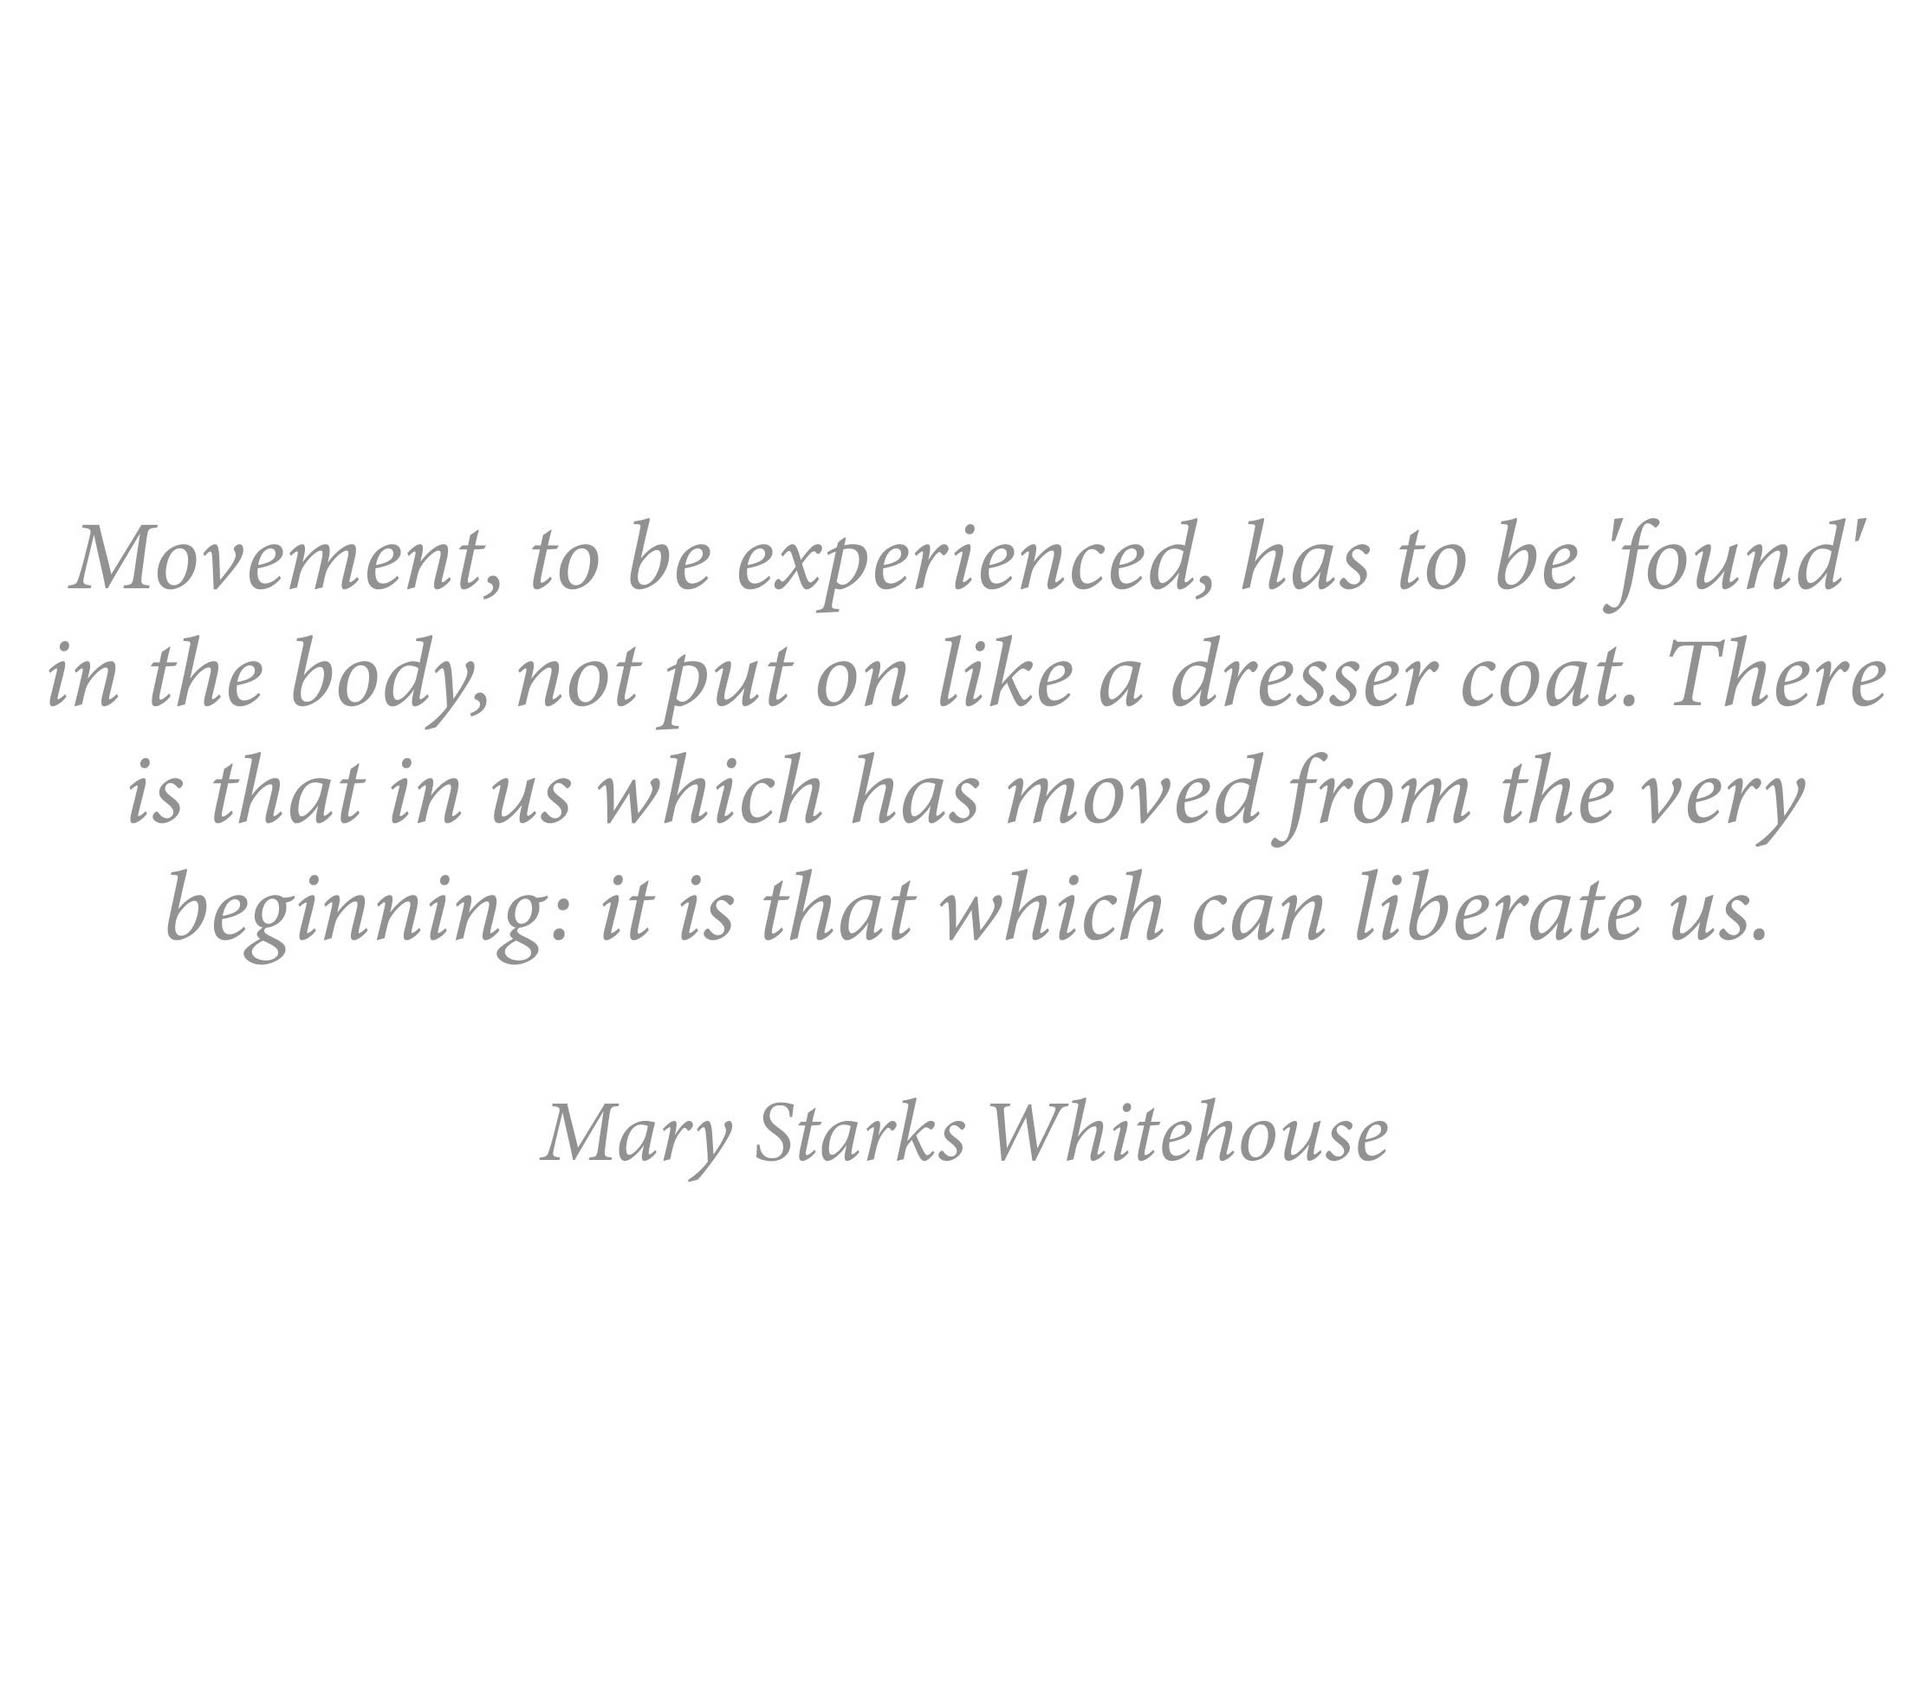 Quote - Movement, to be experienced, has to be 'found' in the body, not put on like a dresser coat. Mary Whitehouse